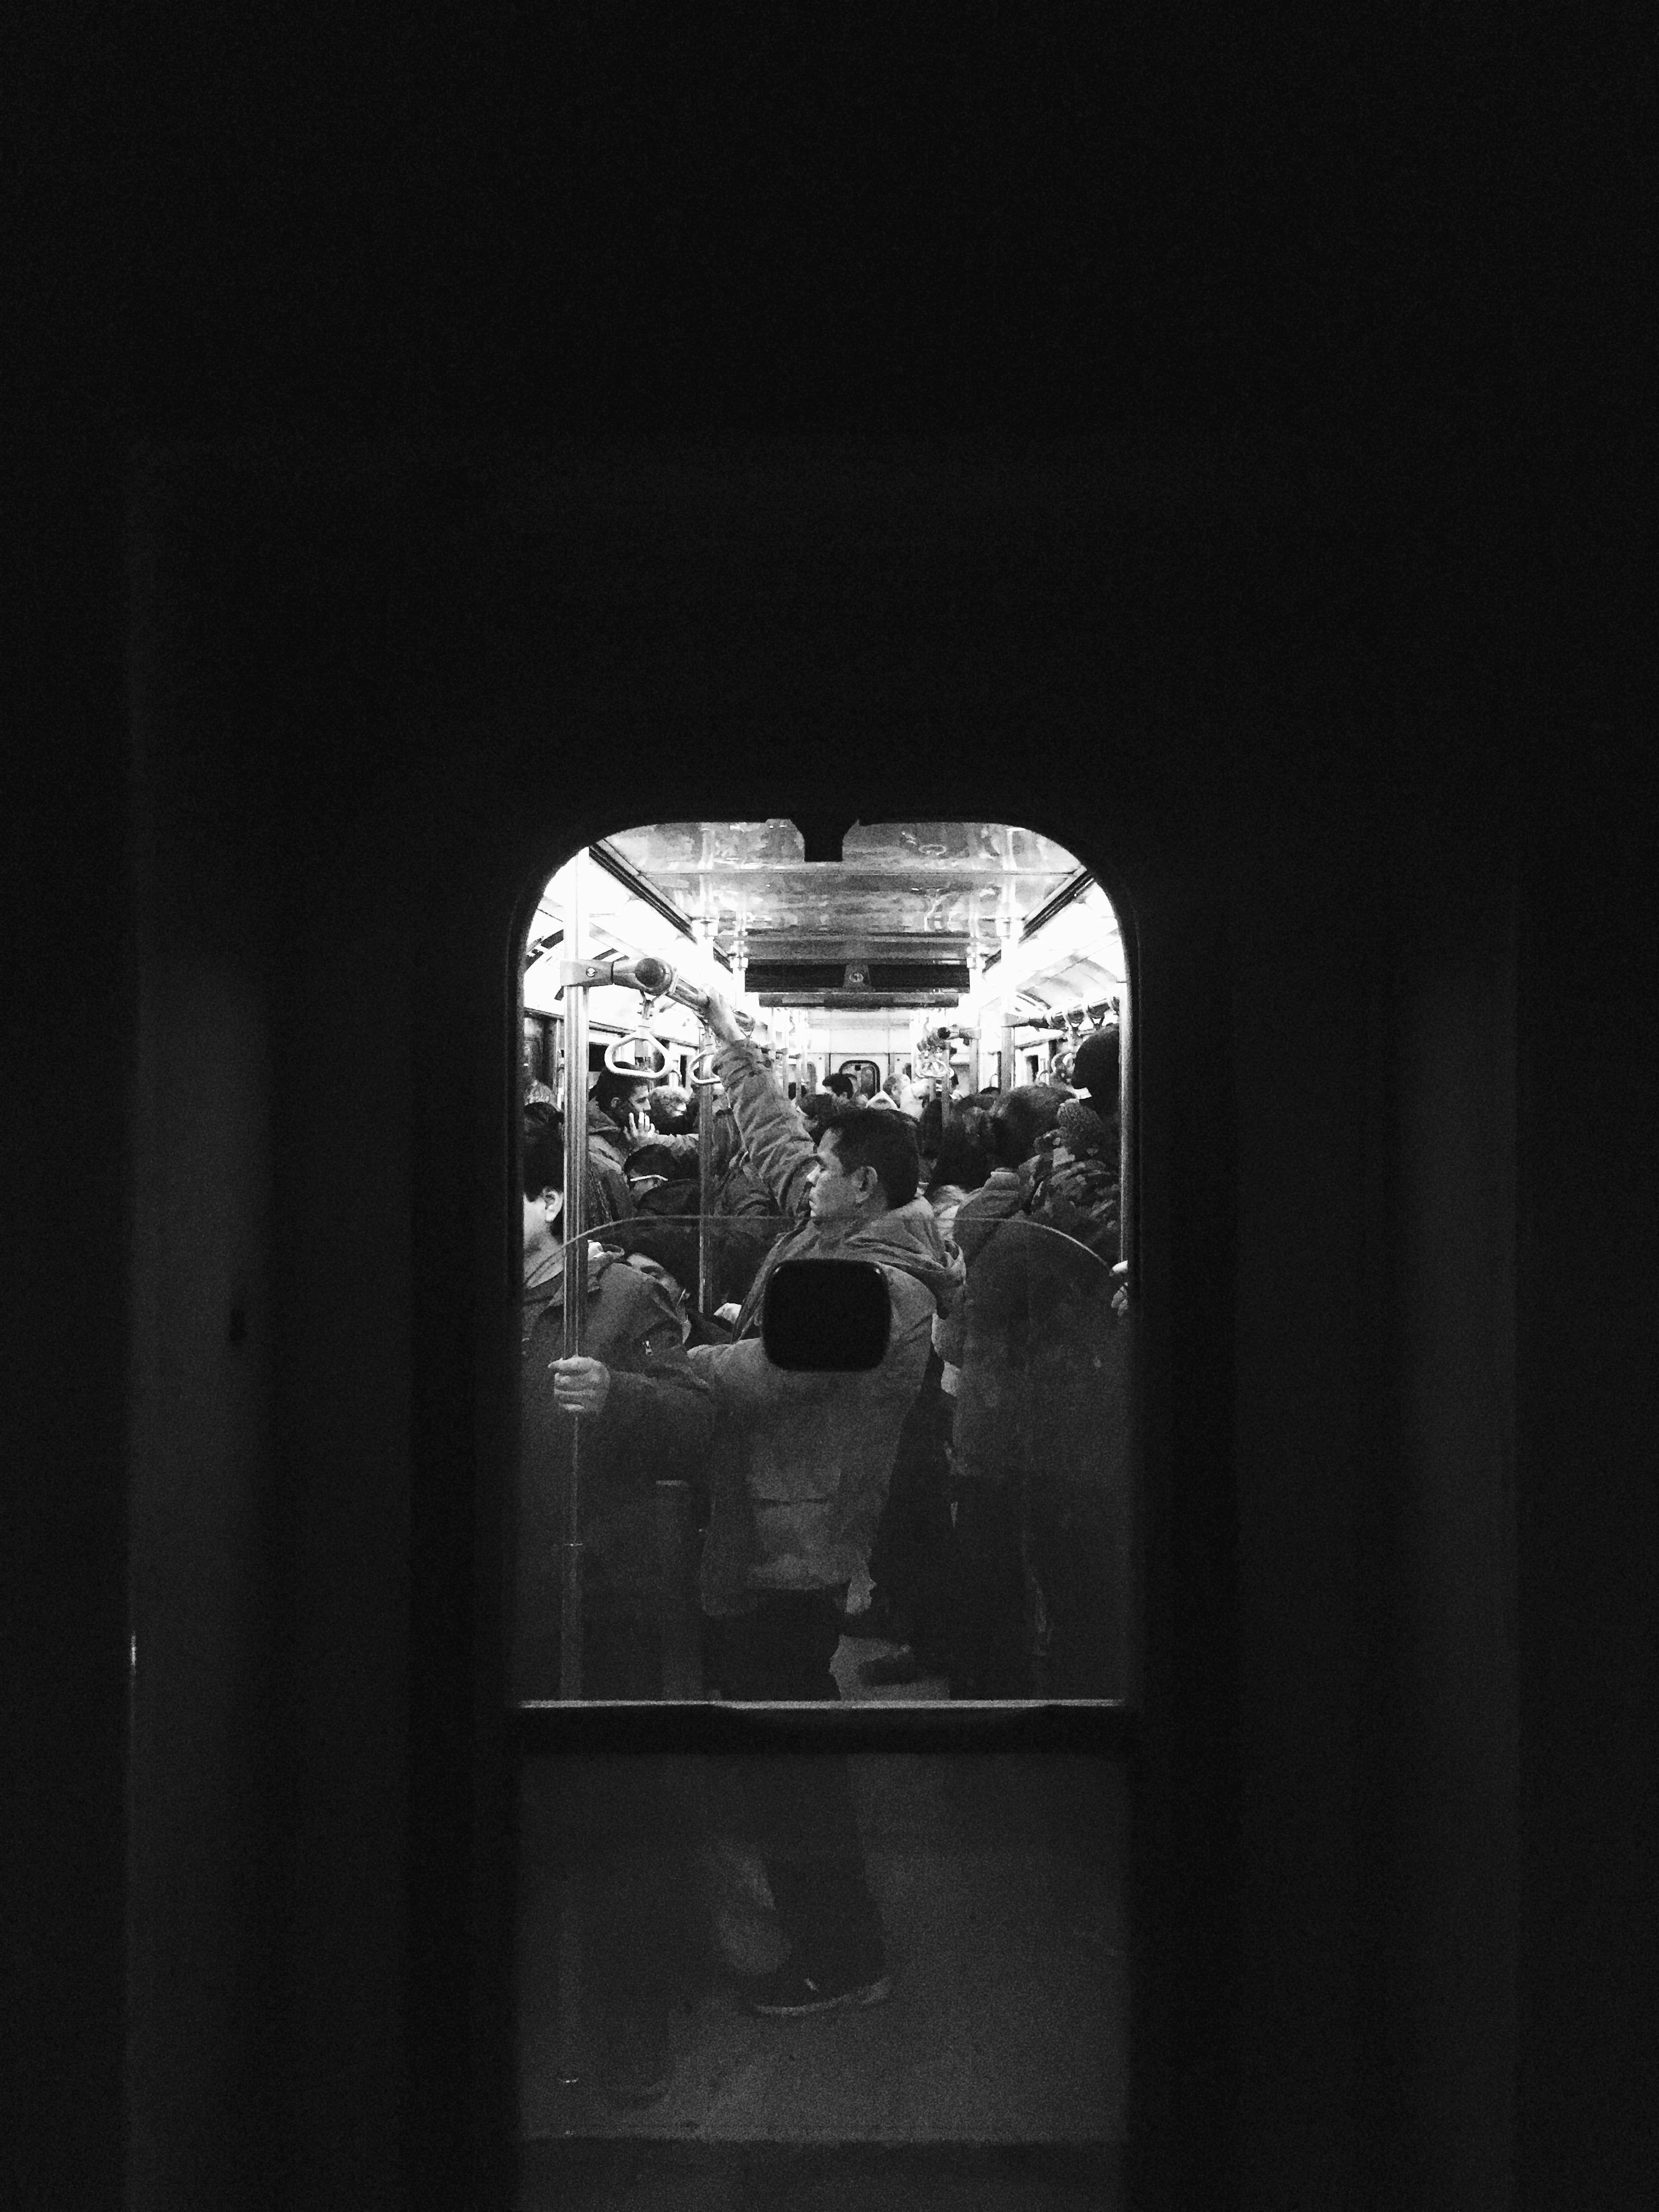 Nostalgic, black and white image of a man inside Santiago's subway. The picture is captured from a different subway car, and the small window of the man's car acts as an artificial frame for his body. The man's eyes are closed, and his body language seems to convey sadness, or tiredness.